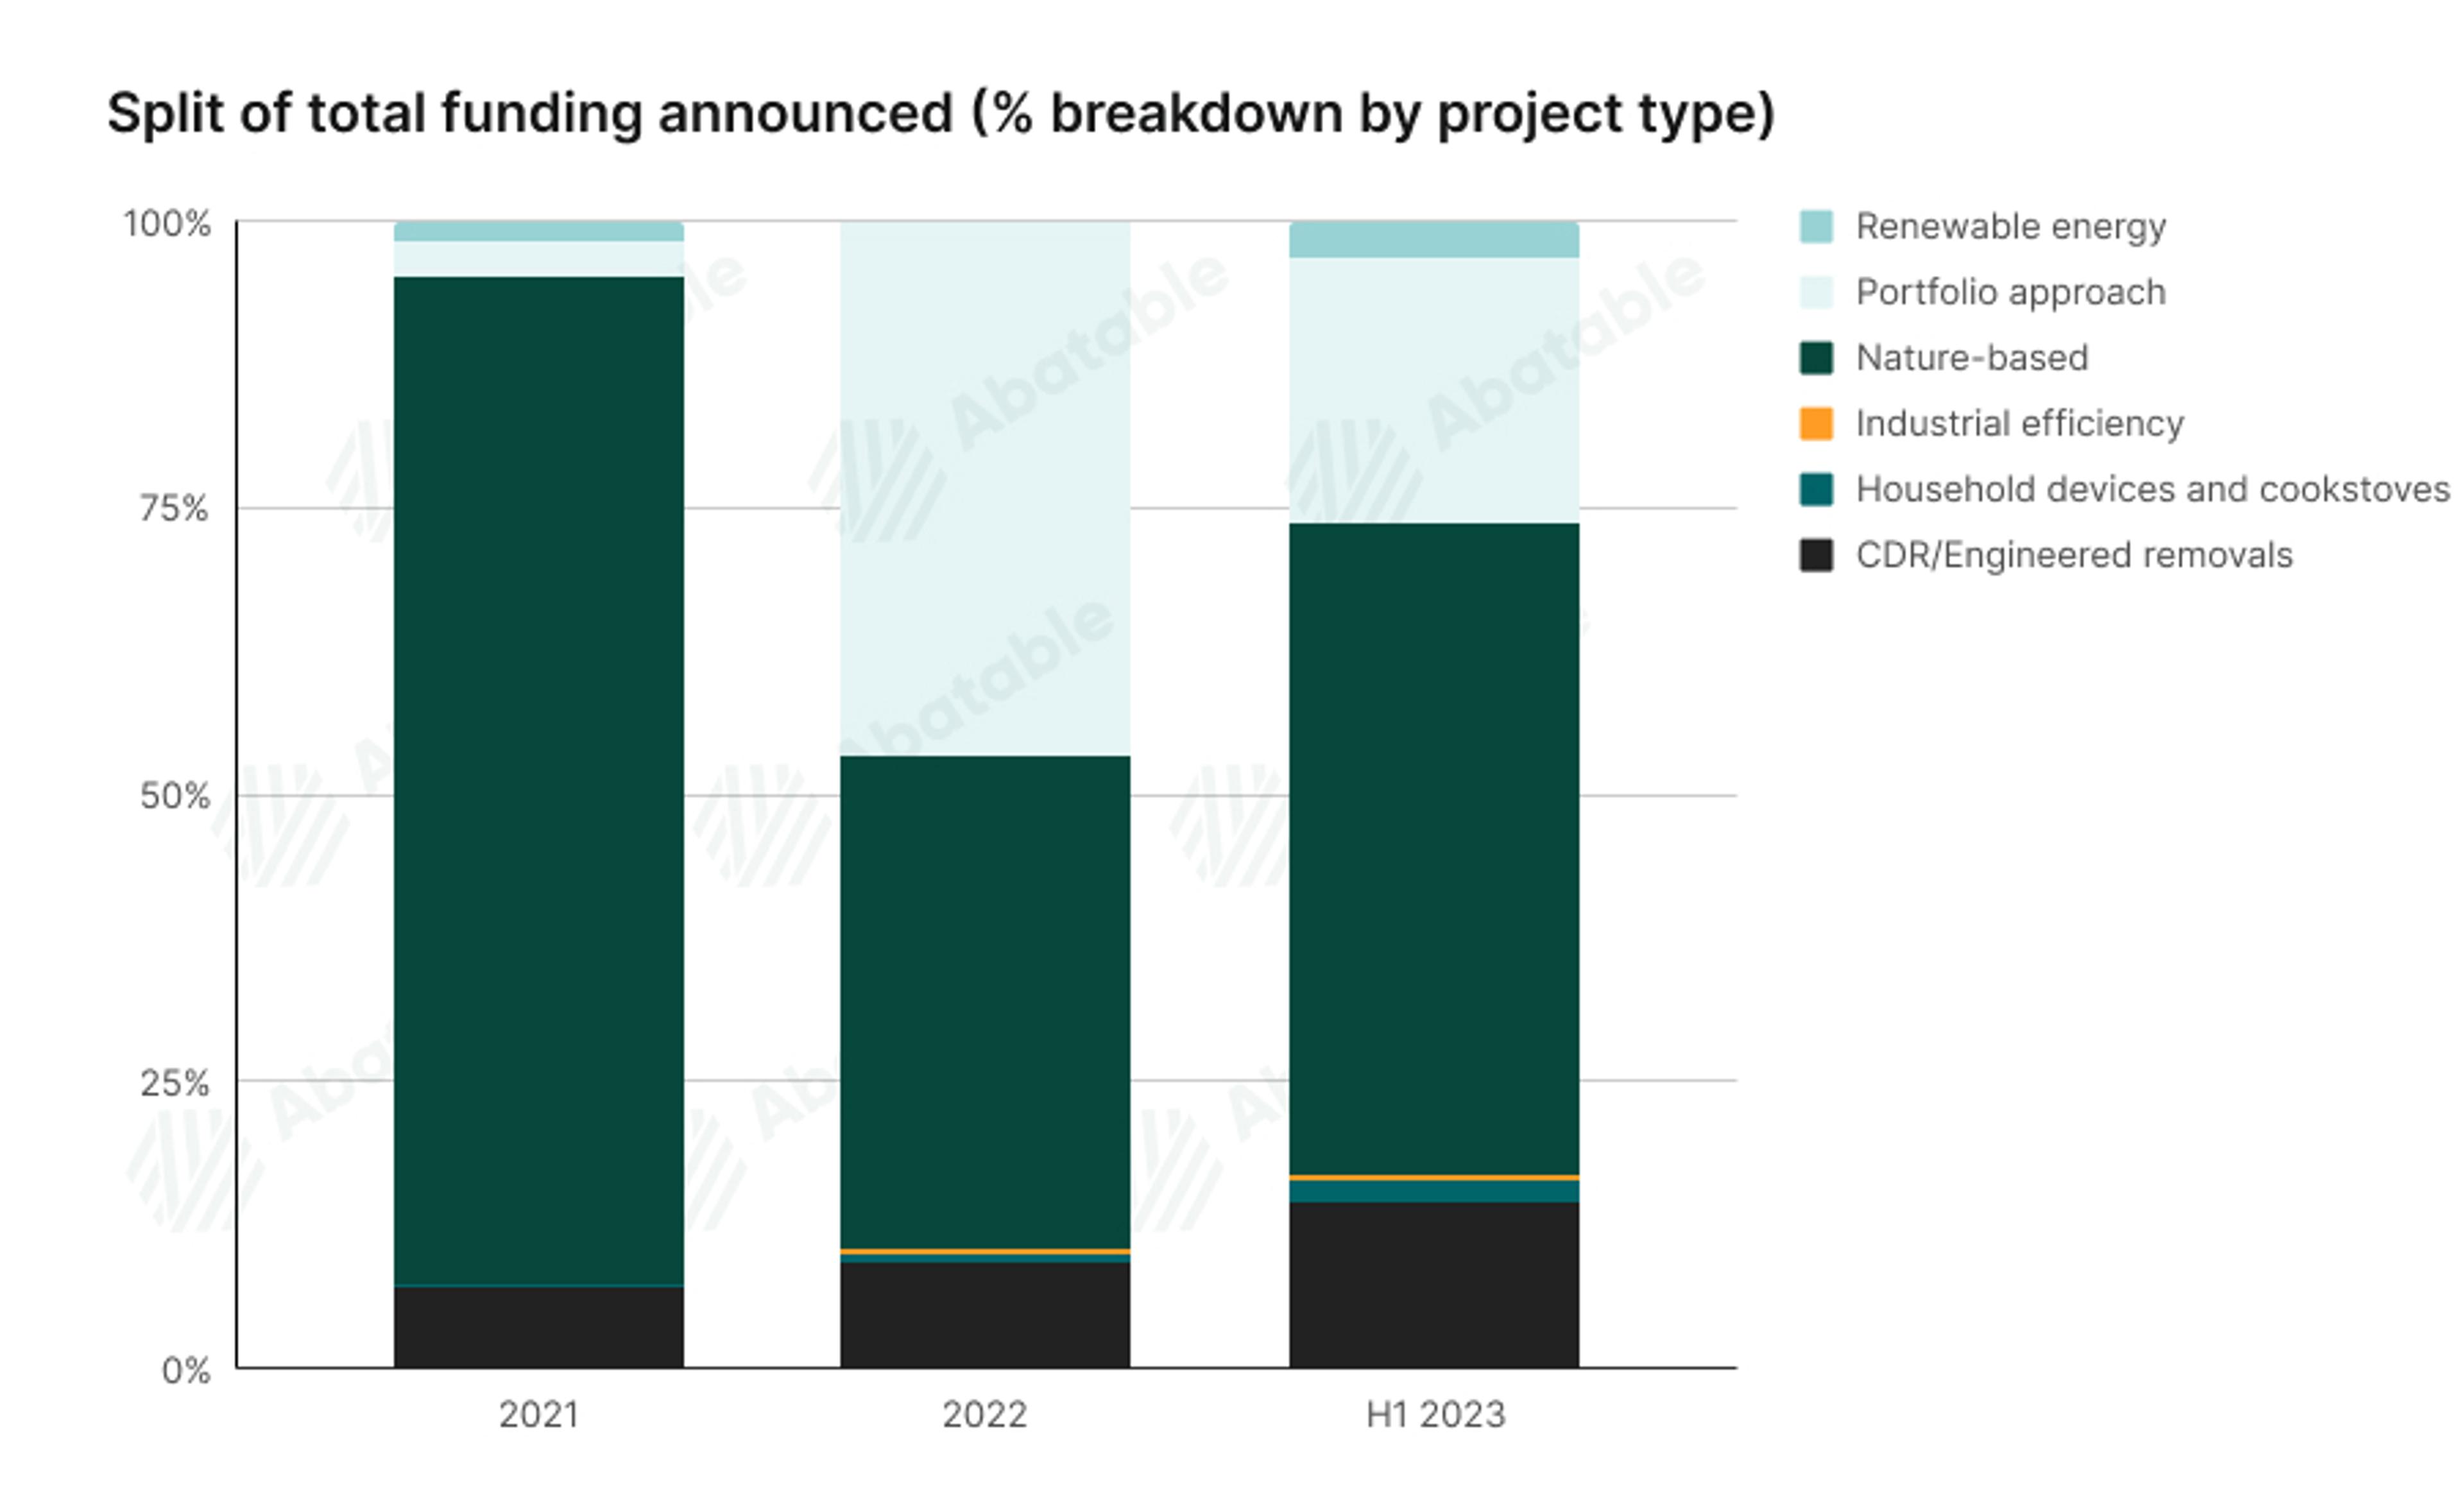 A breakdown of the split of total developer funding announced by project type